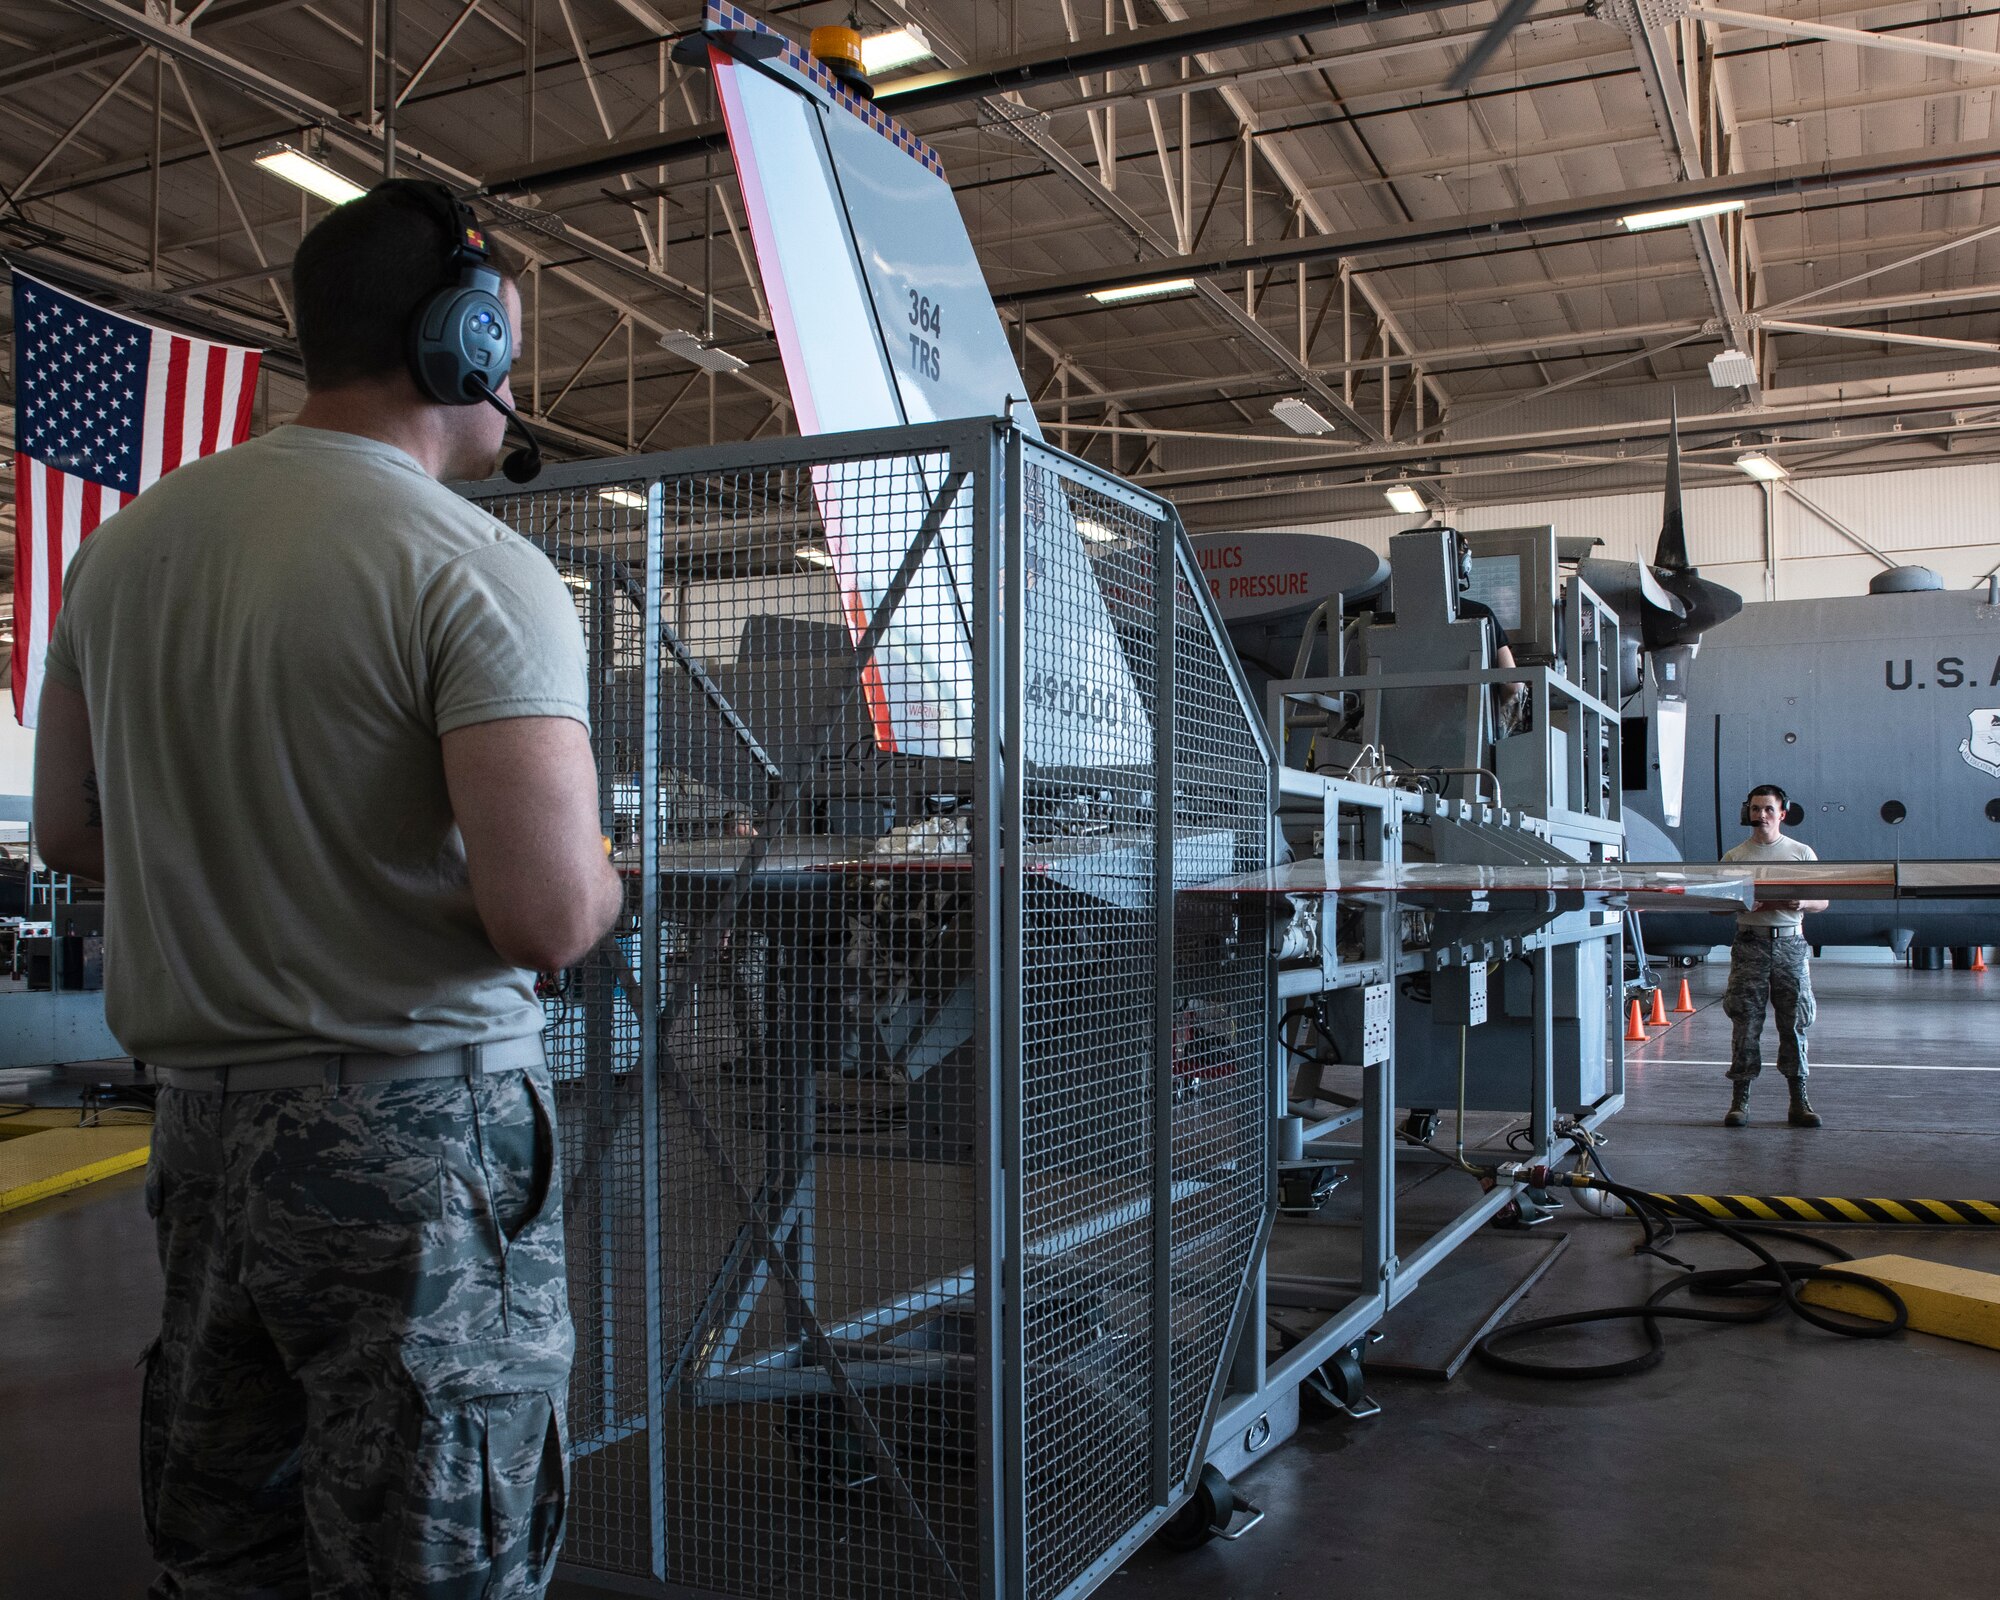 Airman Brice Vulgamore, left, Airman 1st Class Kyle Jaycox, in seat, and Airman 1st Class Matthew Higgs, 364th Training Squadron hydraulic systems apprentice course students, troubleshoot the hydraulics systems in a flight control simulator at Sheppard Air Force Base, Texas, June 28, 2019. Higgs plays the role of operations checks director and reads instructions for Jaycox to flip the switches in the flightdeck as Vulgamore makes sure the system responds correctly. (U.S. Air Force photo by Airman1st Class Pedro Tenorio